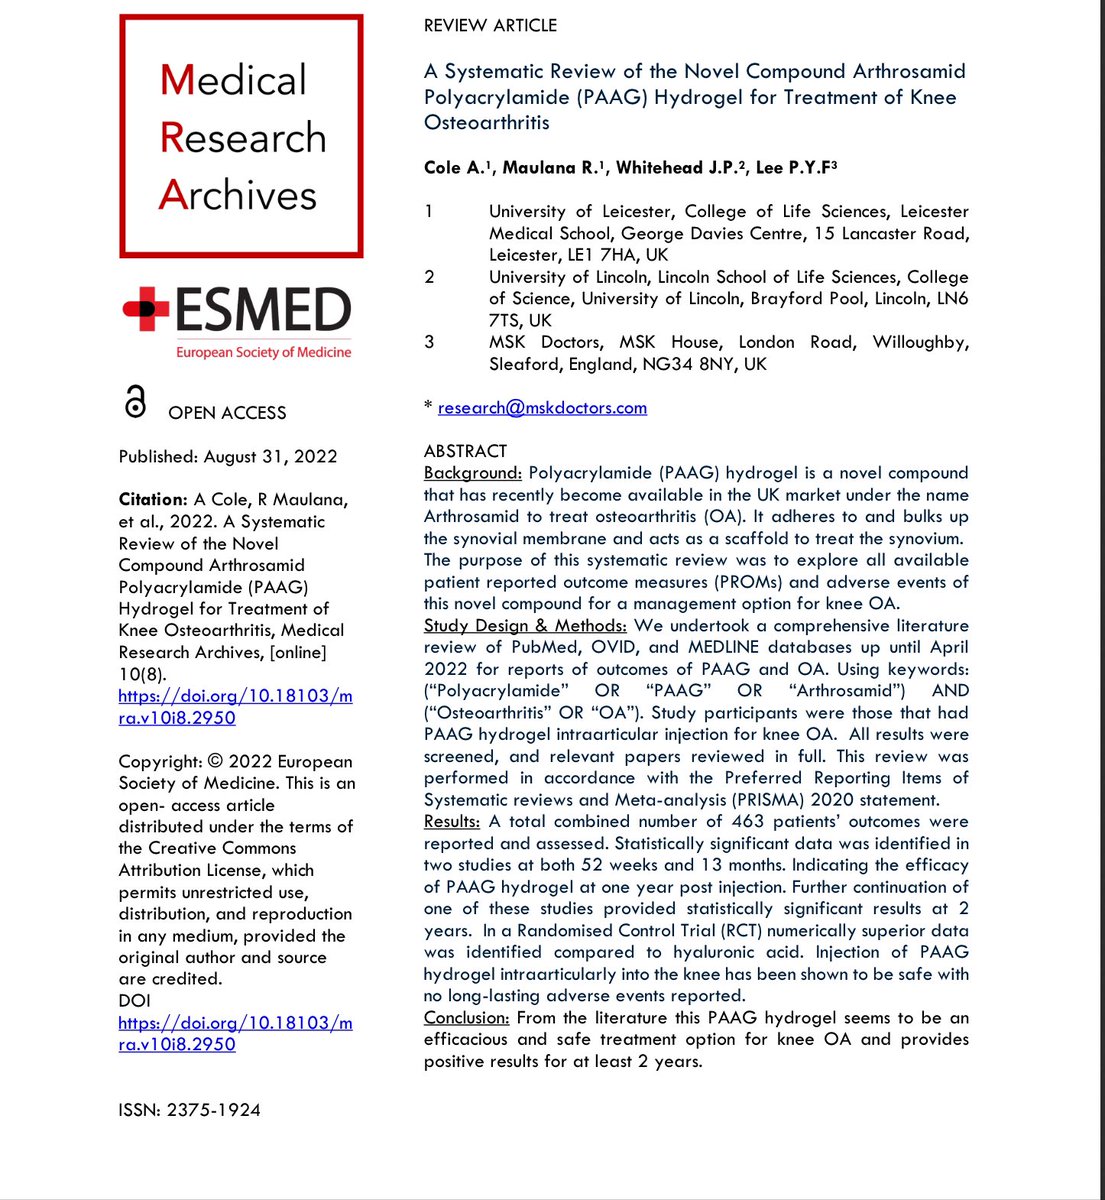 OMG a systematic review with a ridiculous positive spin based on five studies that 3 by same author (2 on same cohort) Non-placebo controlled A Systematic Review of the Novel Compound Arthrosamid Polyacrylamide (PAAG) Hydrogel for Treatment of Knee esmed.org/MRA/mra/articl…